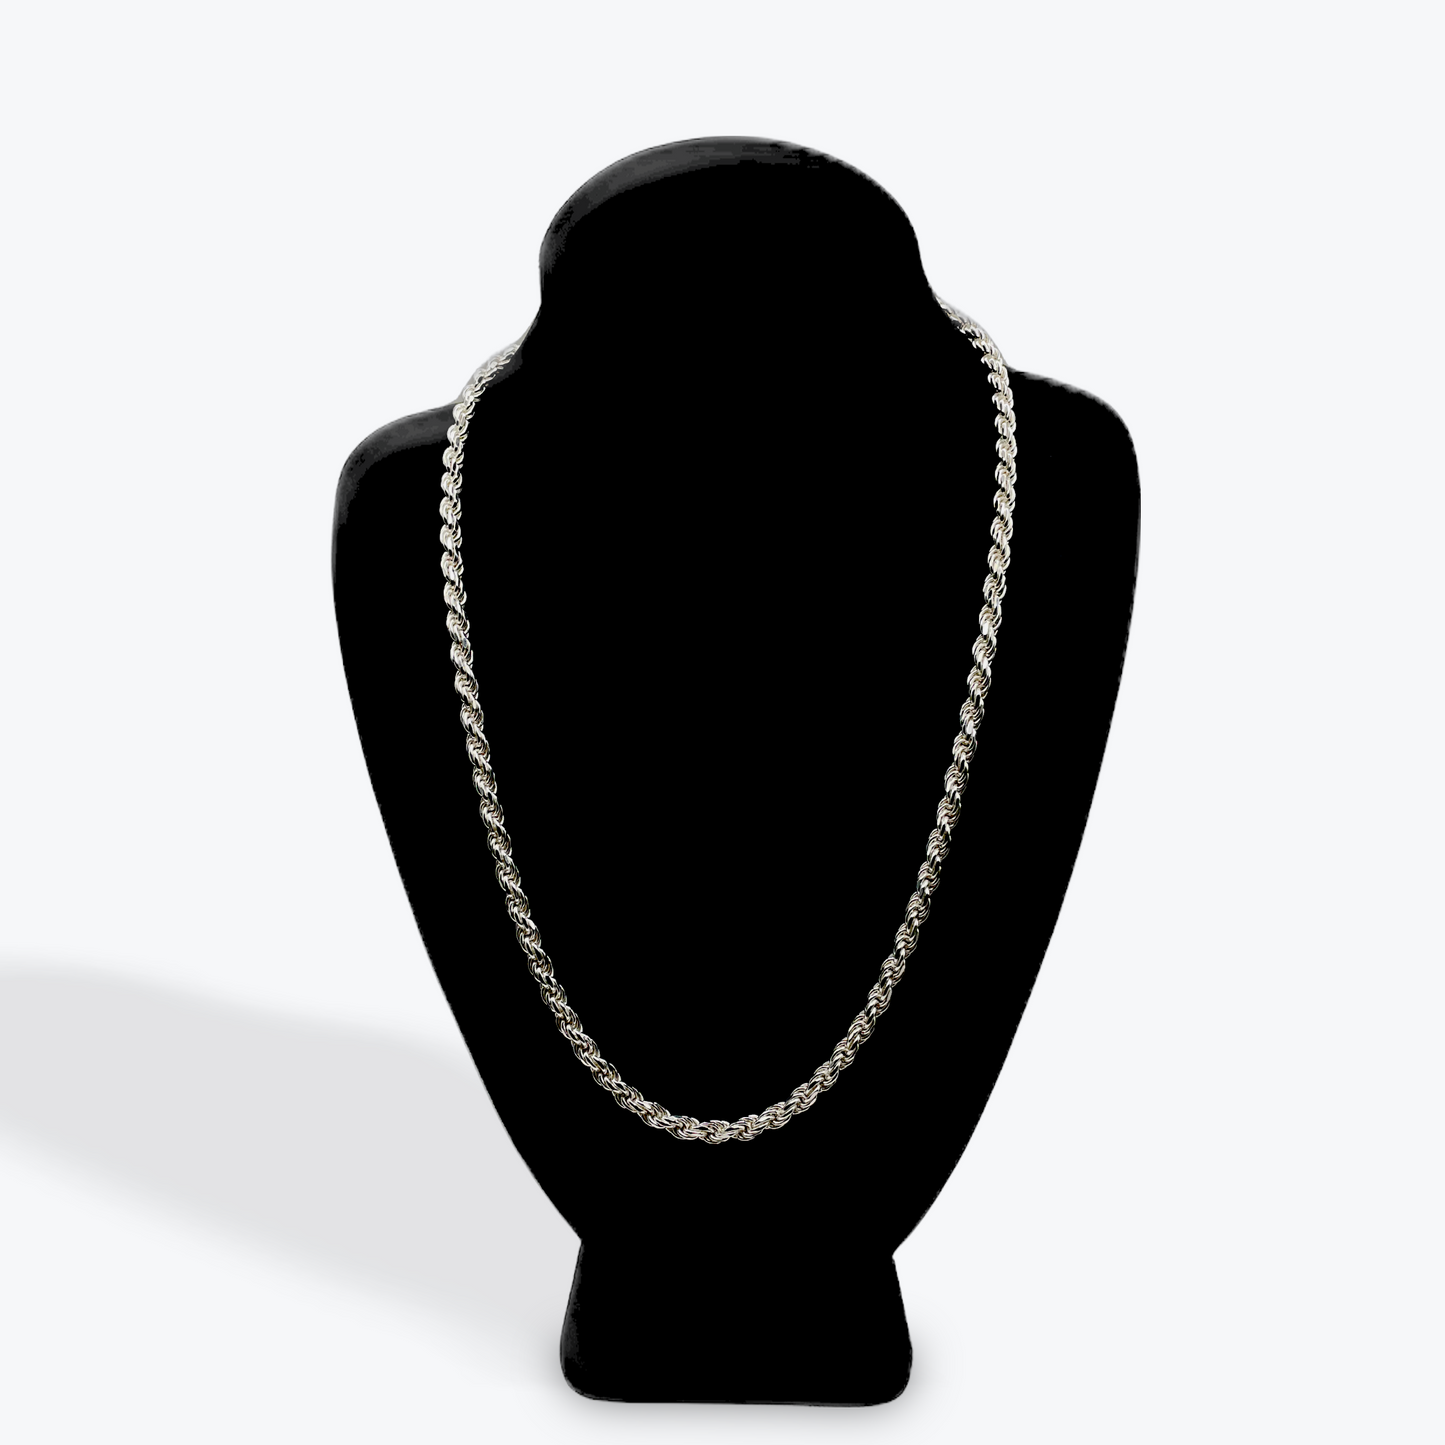 925 Silver Rope Chain - 22 inch